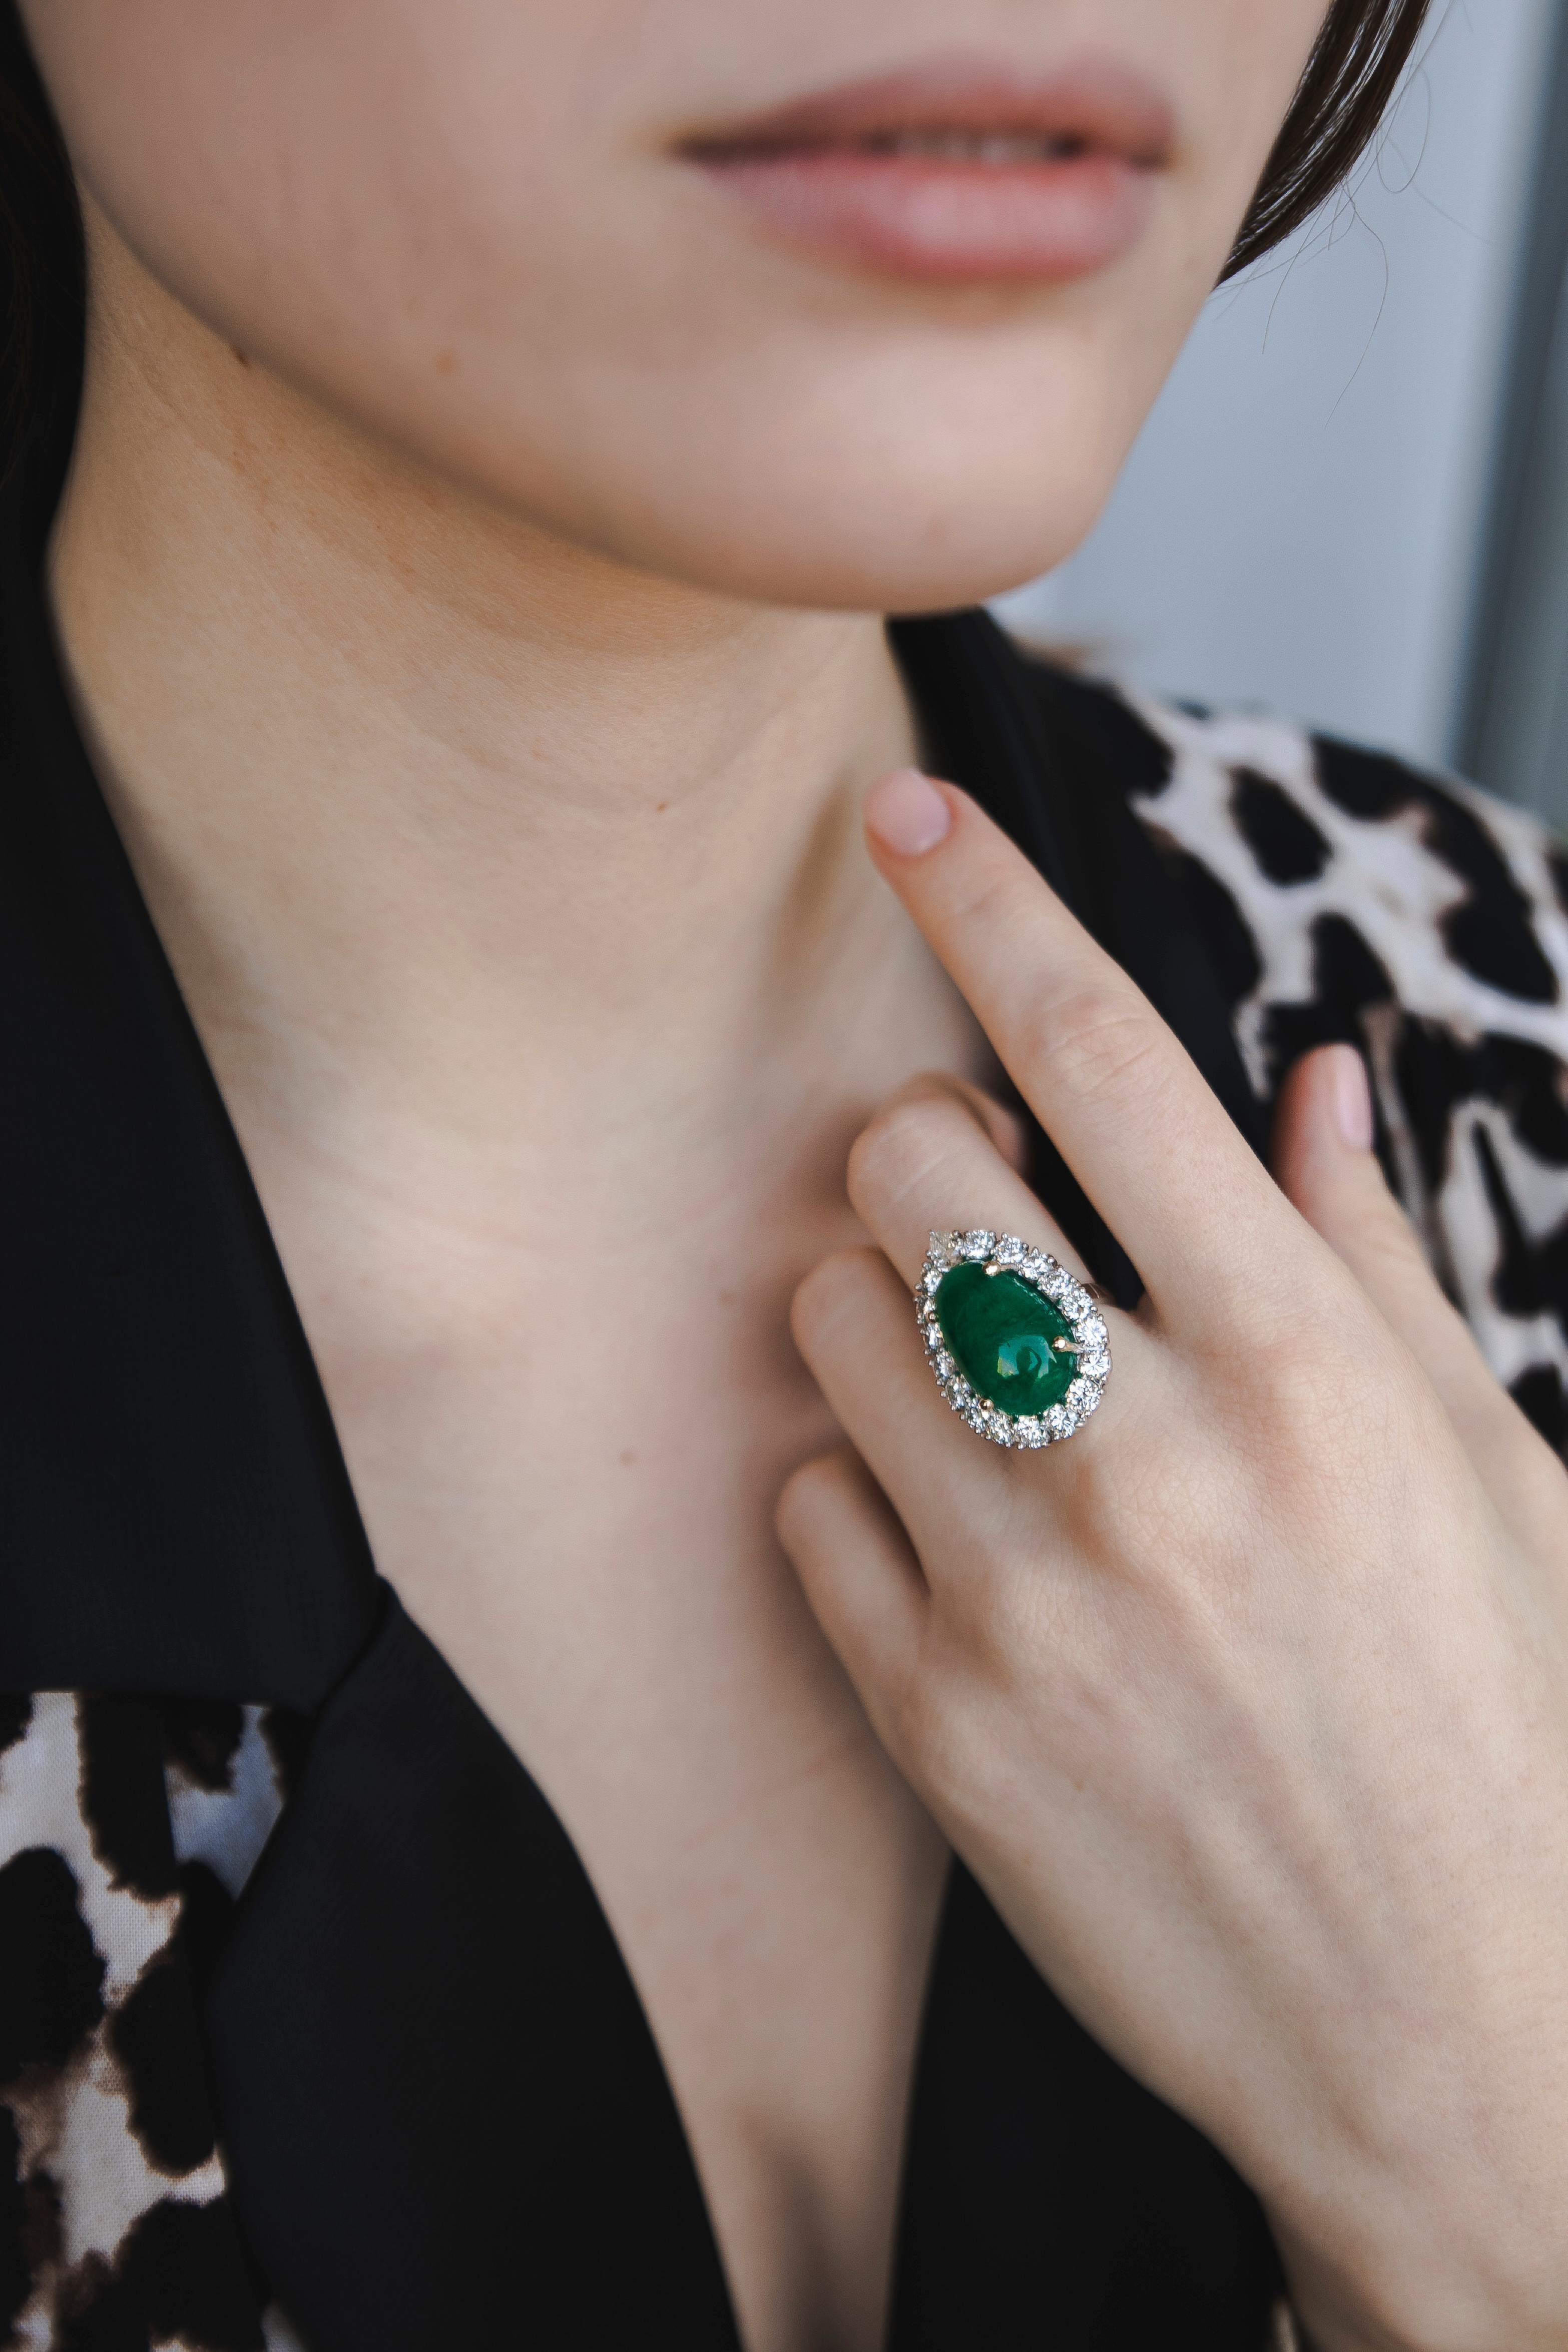 Ring transformer to Pendant or Brooch in Platinum with 22 Ct Cabochon Emerald and 17 round-cut Diamonds and one pear-shaped Diamond with a total weight of 3Ct. 1945.
Highly collectable item, amazing Emerald ring that in a matter of seconds